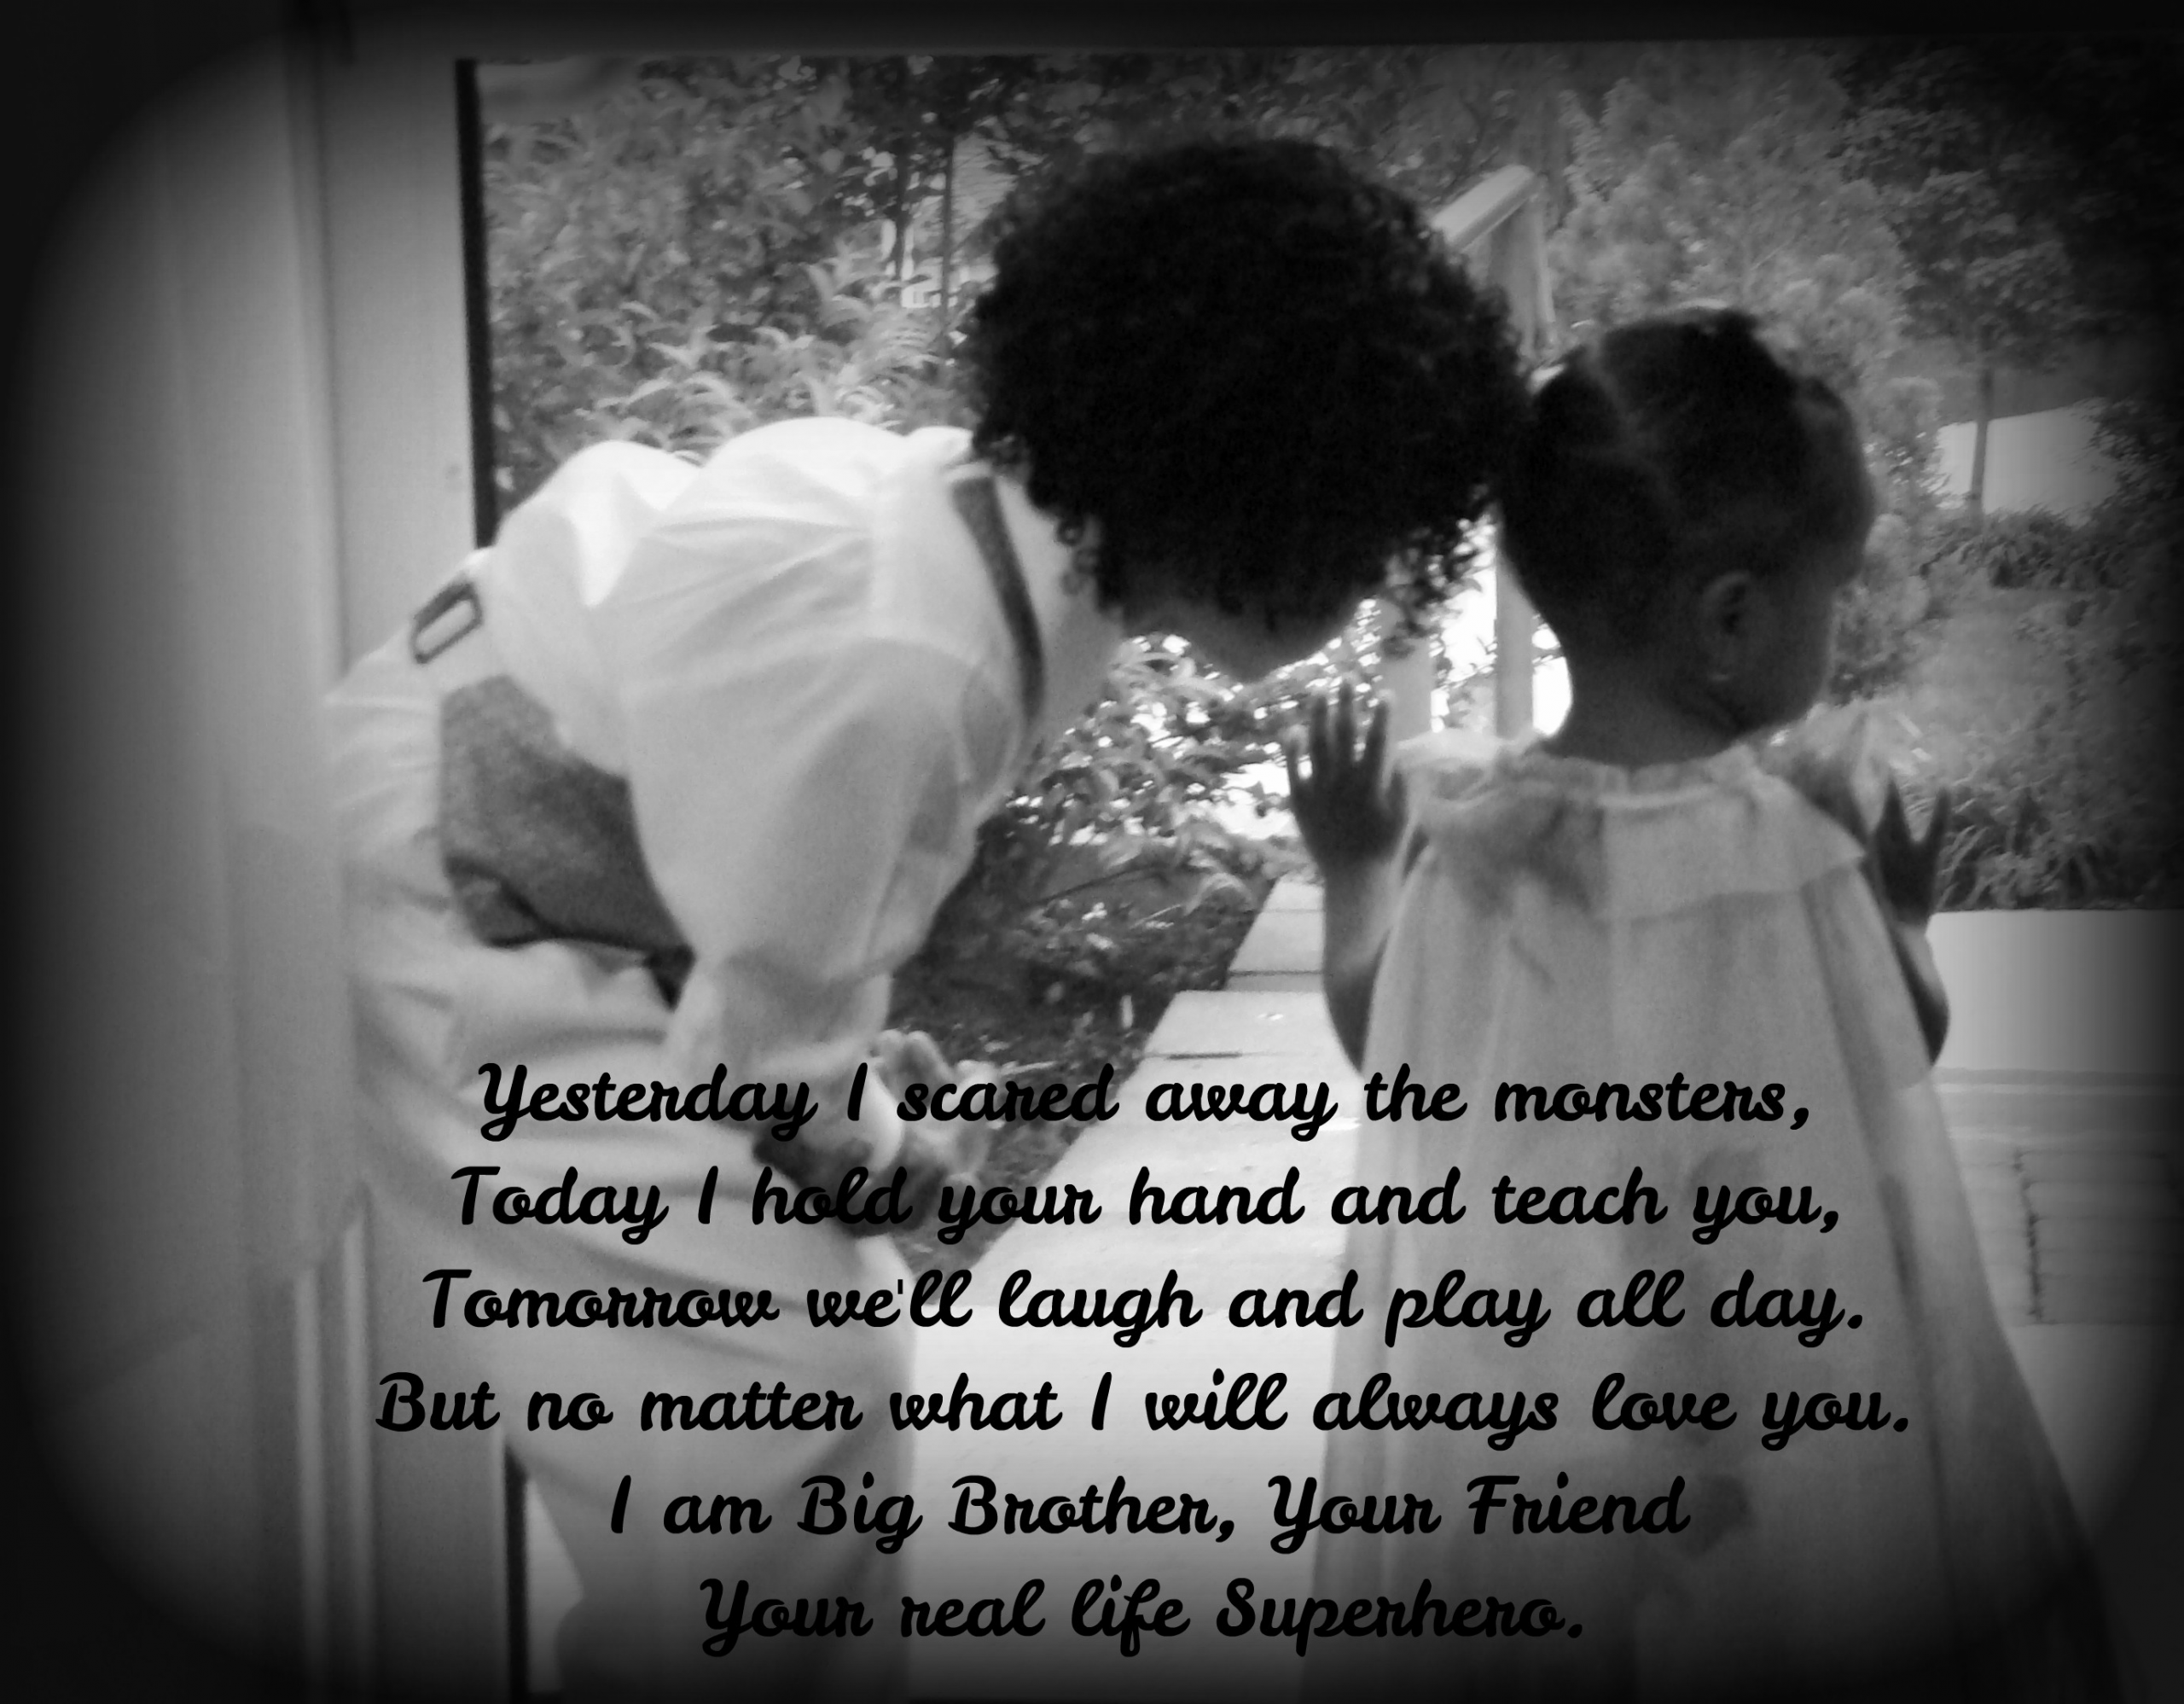 Brothers And Sister Love Quotes
 Big Brother Little Sister Love Quotes Sibling